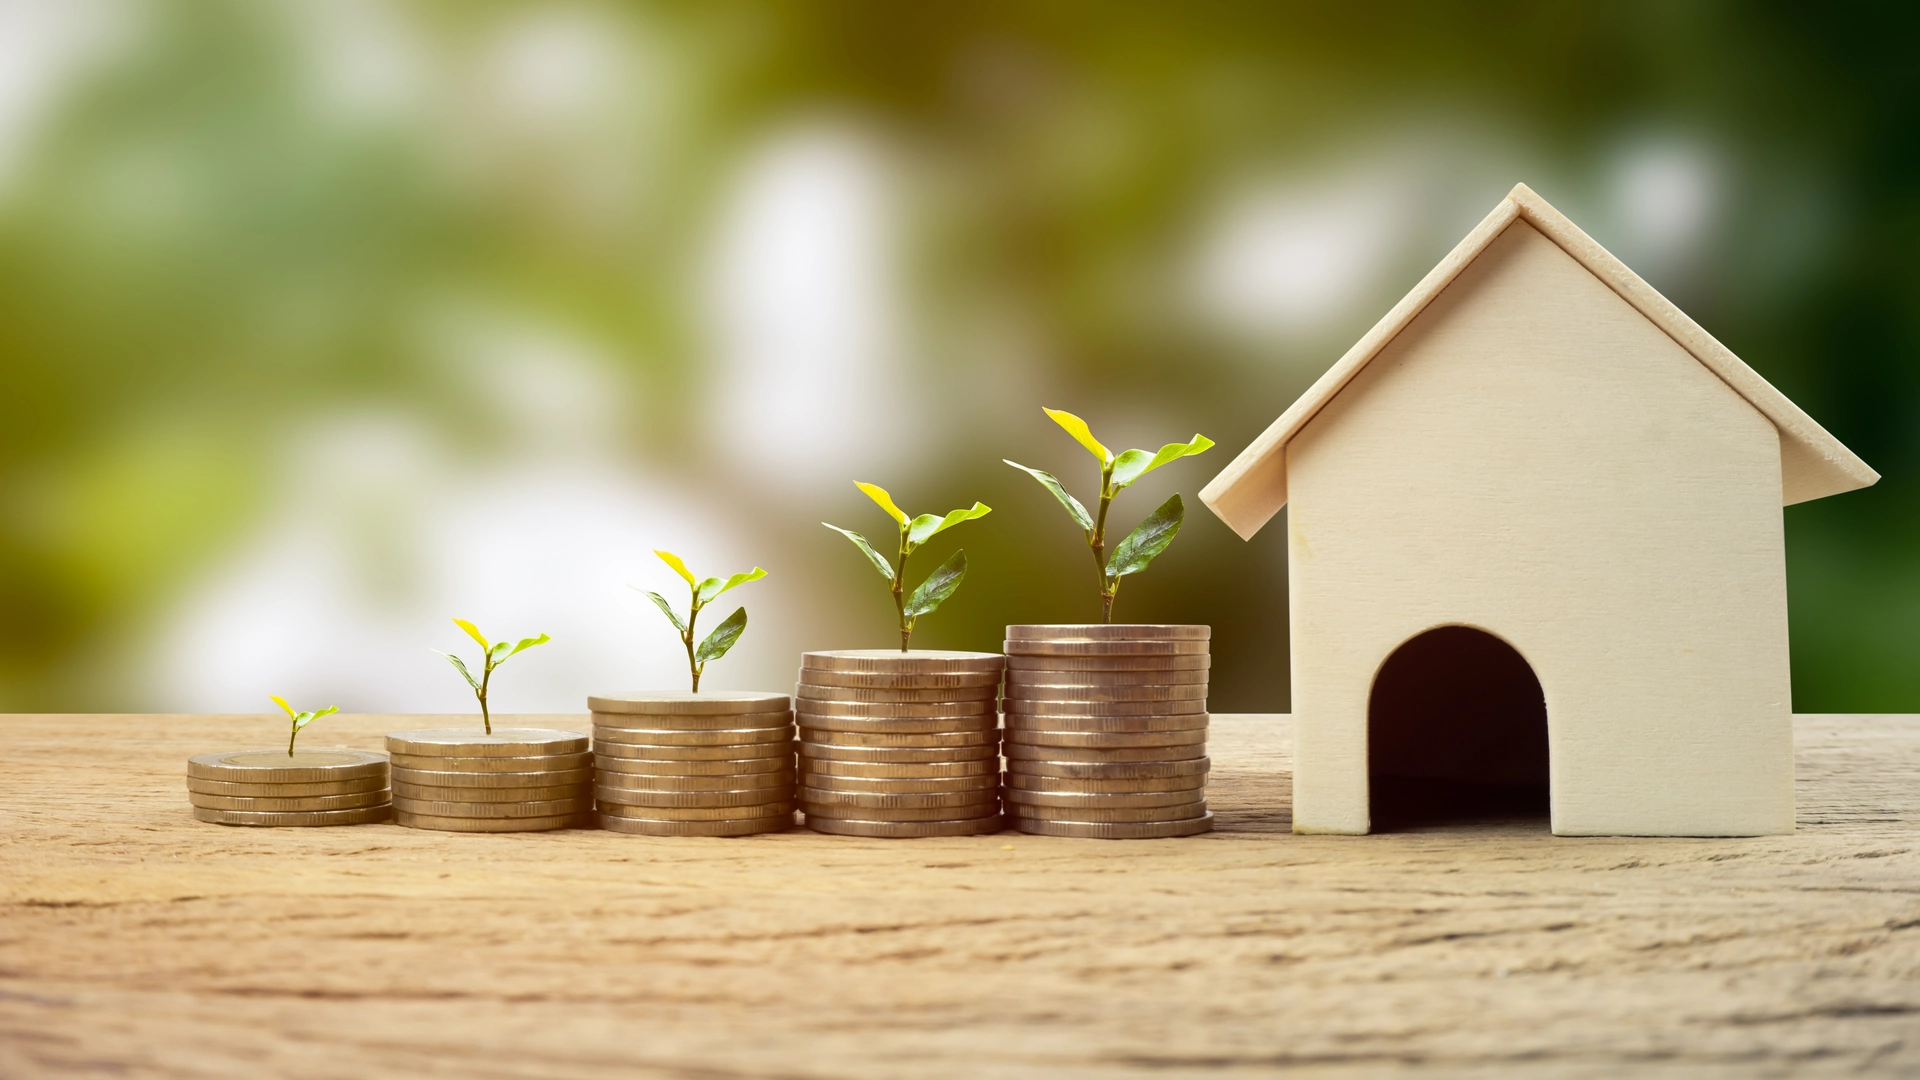 Key Benefits of Investing in Houses